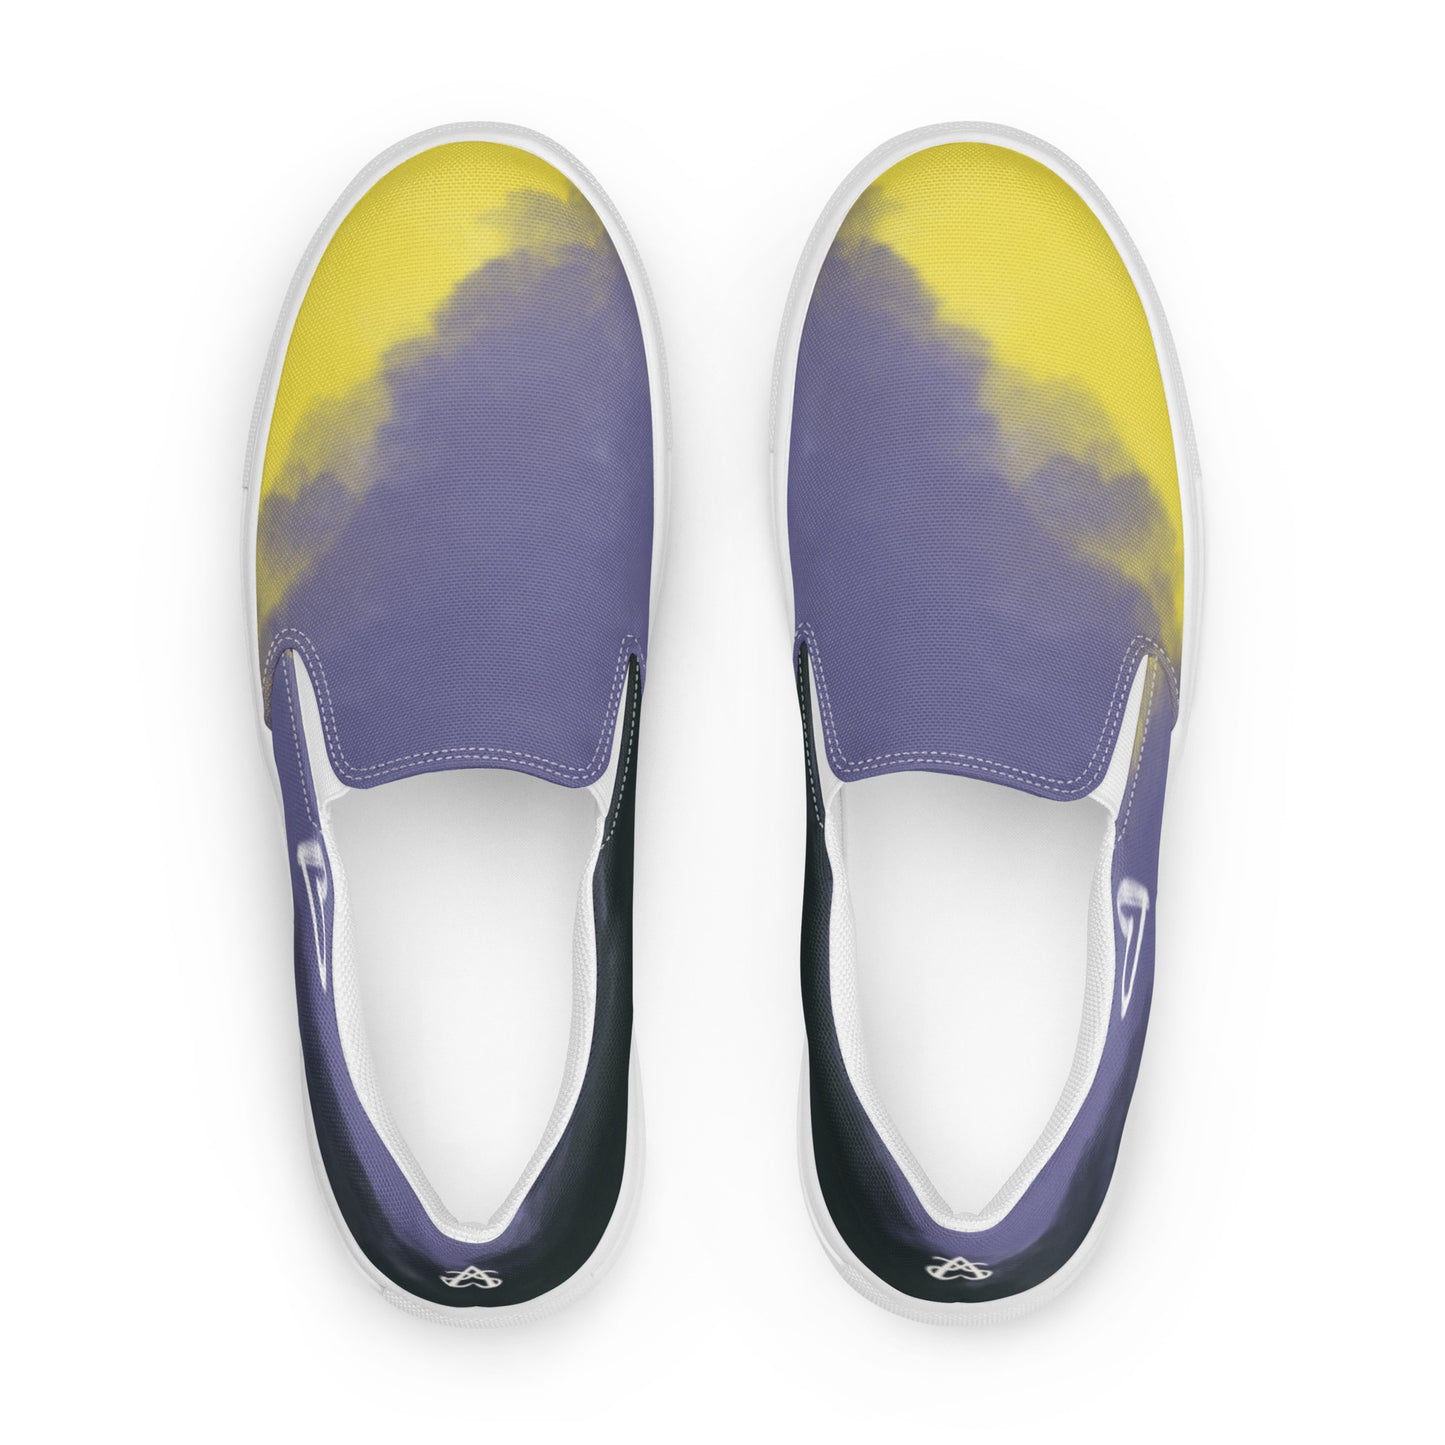 Top view: A pair of slip-on shoes with the non-binary colors in wisps of clouds with a white hand drawn heart on the outside under the ankle and the Aras Sivad Studio logo in white on the back.